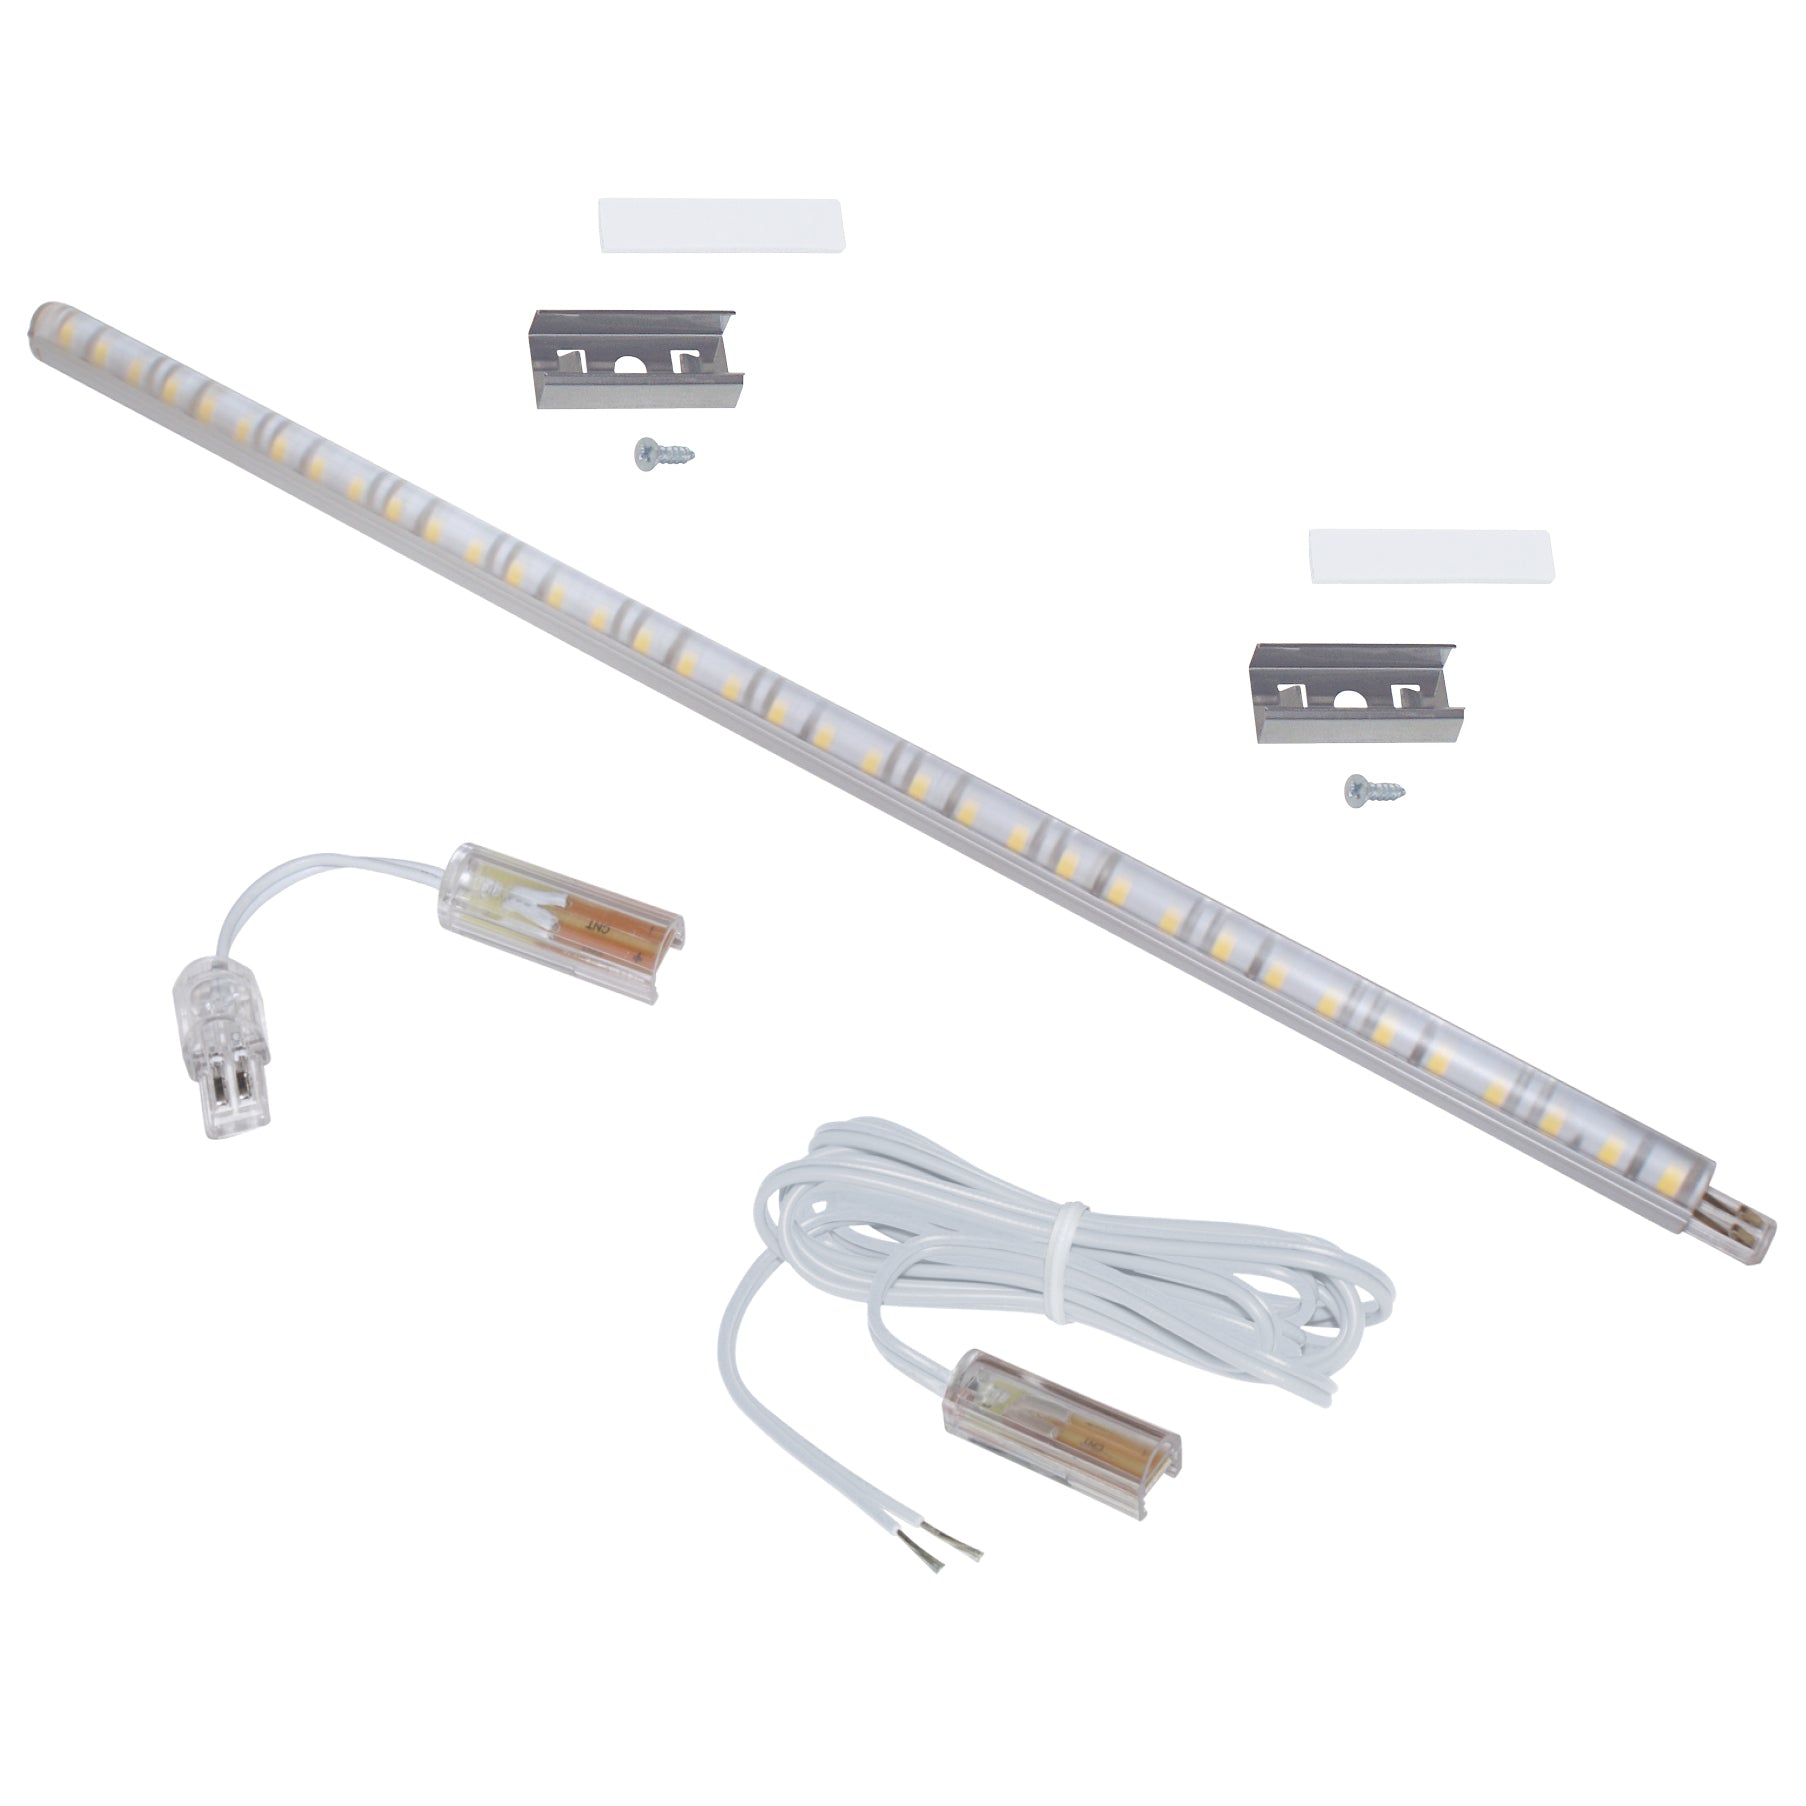 LED Tape Light Diffuser Armacost Lighting